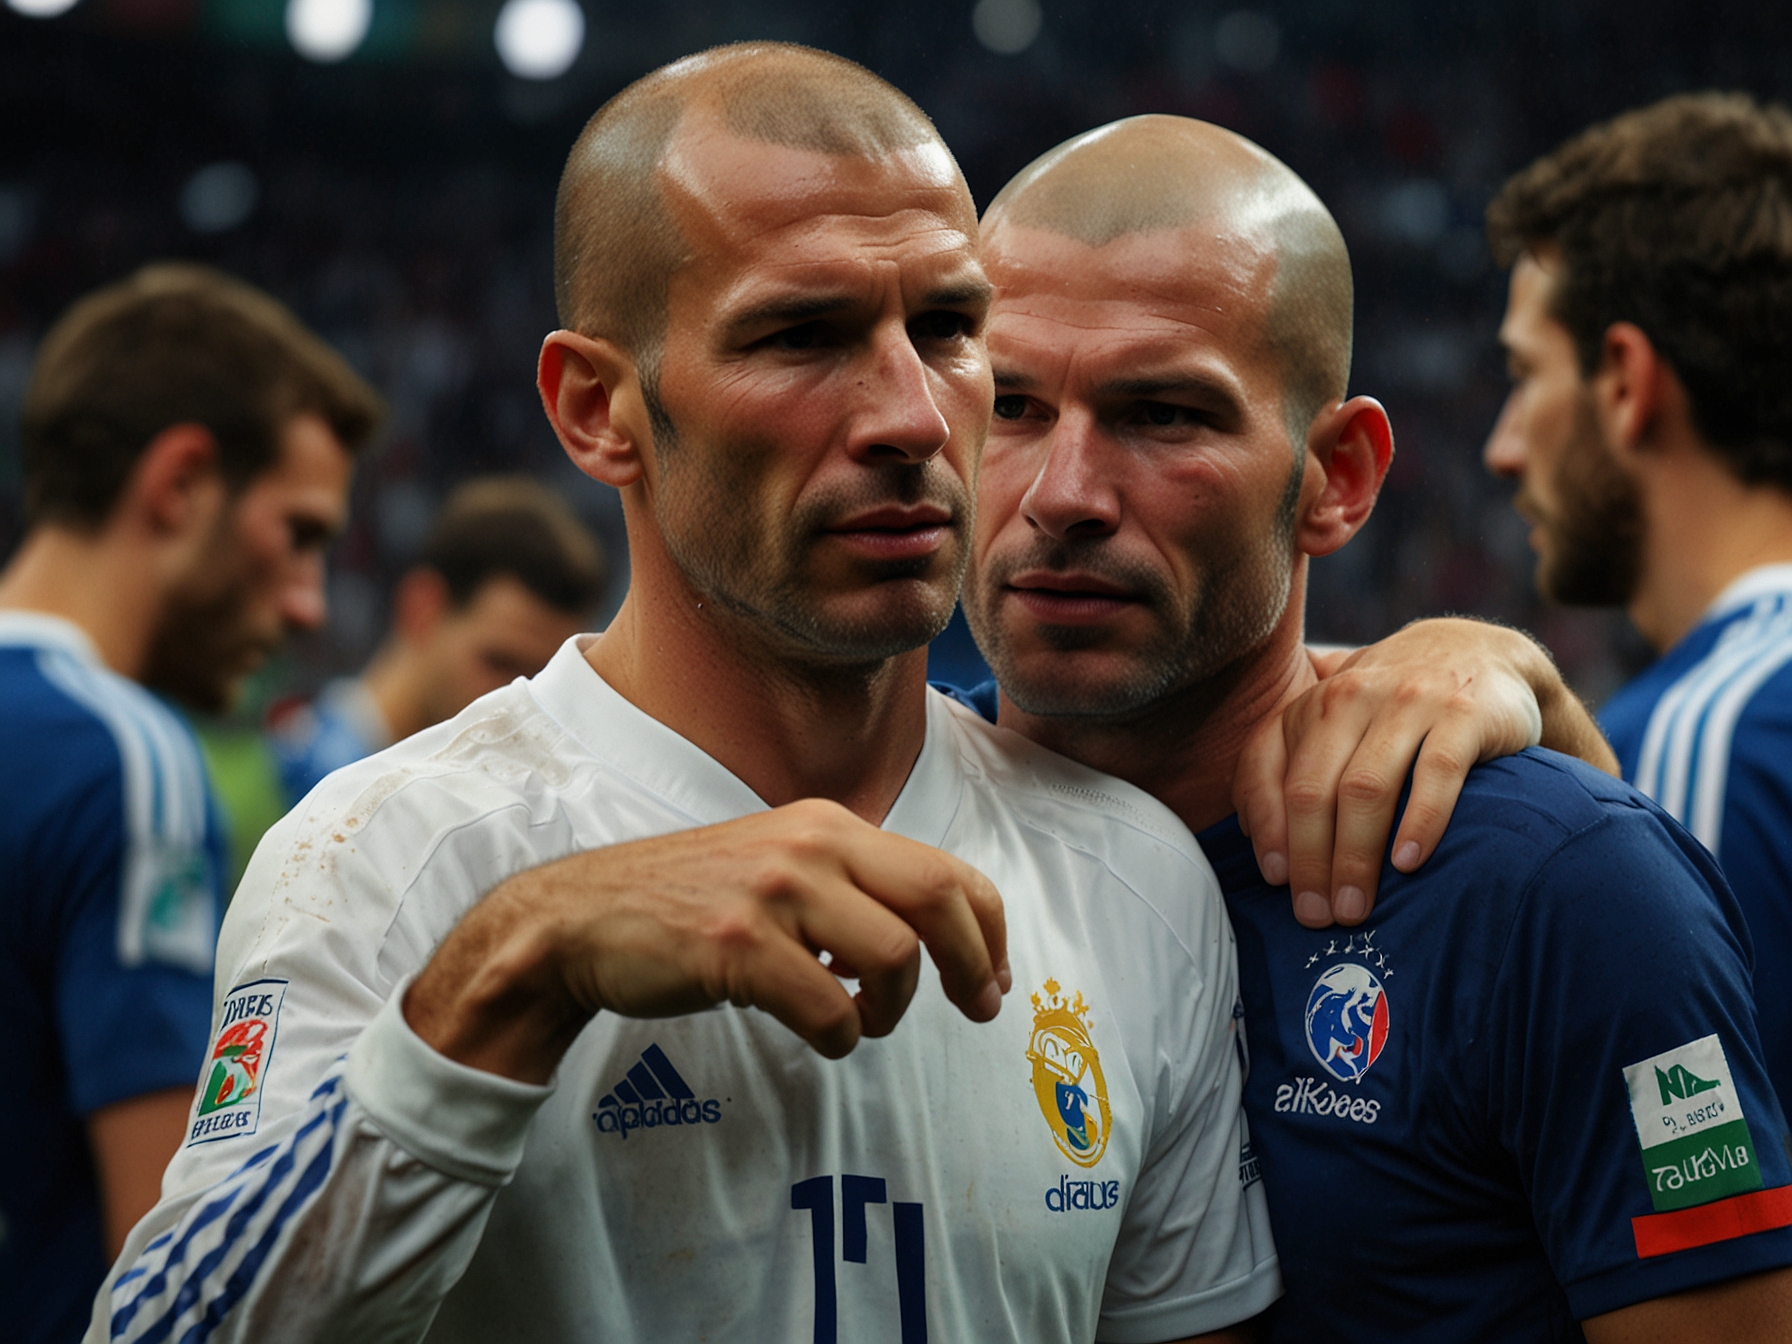 Post-match image showing Zidane consoling English players, demonstrating his commendable sportsmanship and humility despite orchestrating a dramatic comeback victory for France.